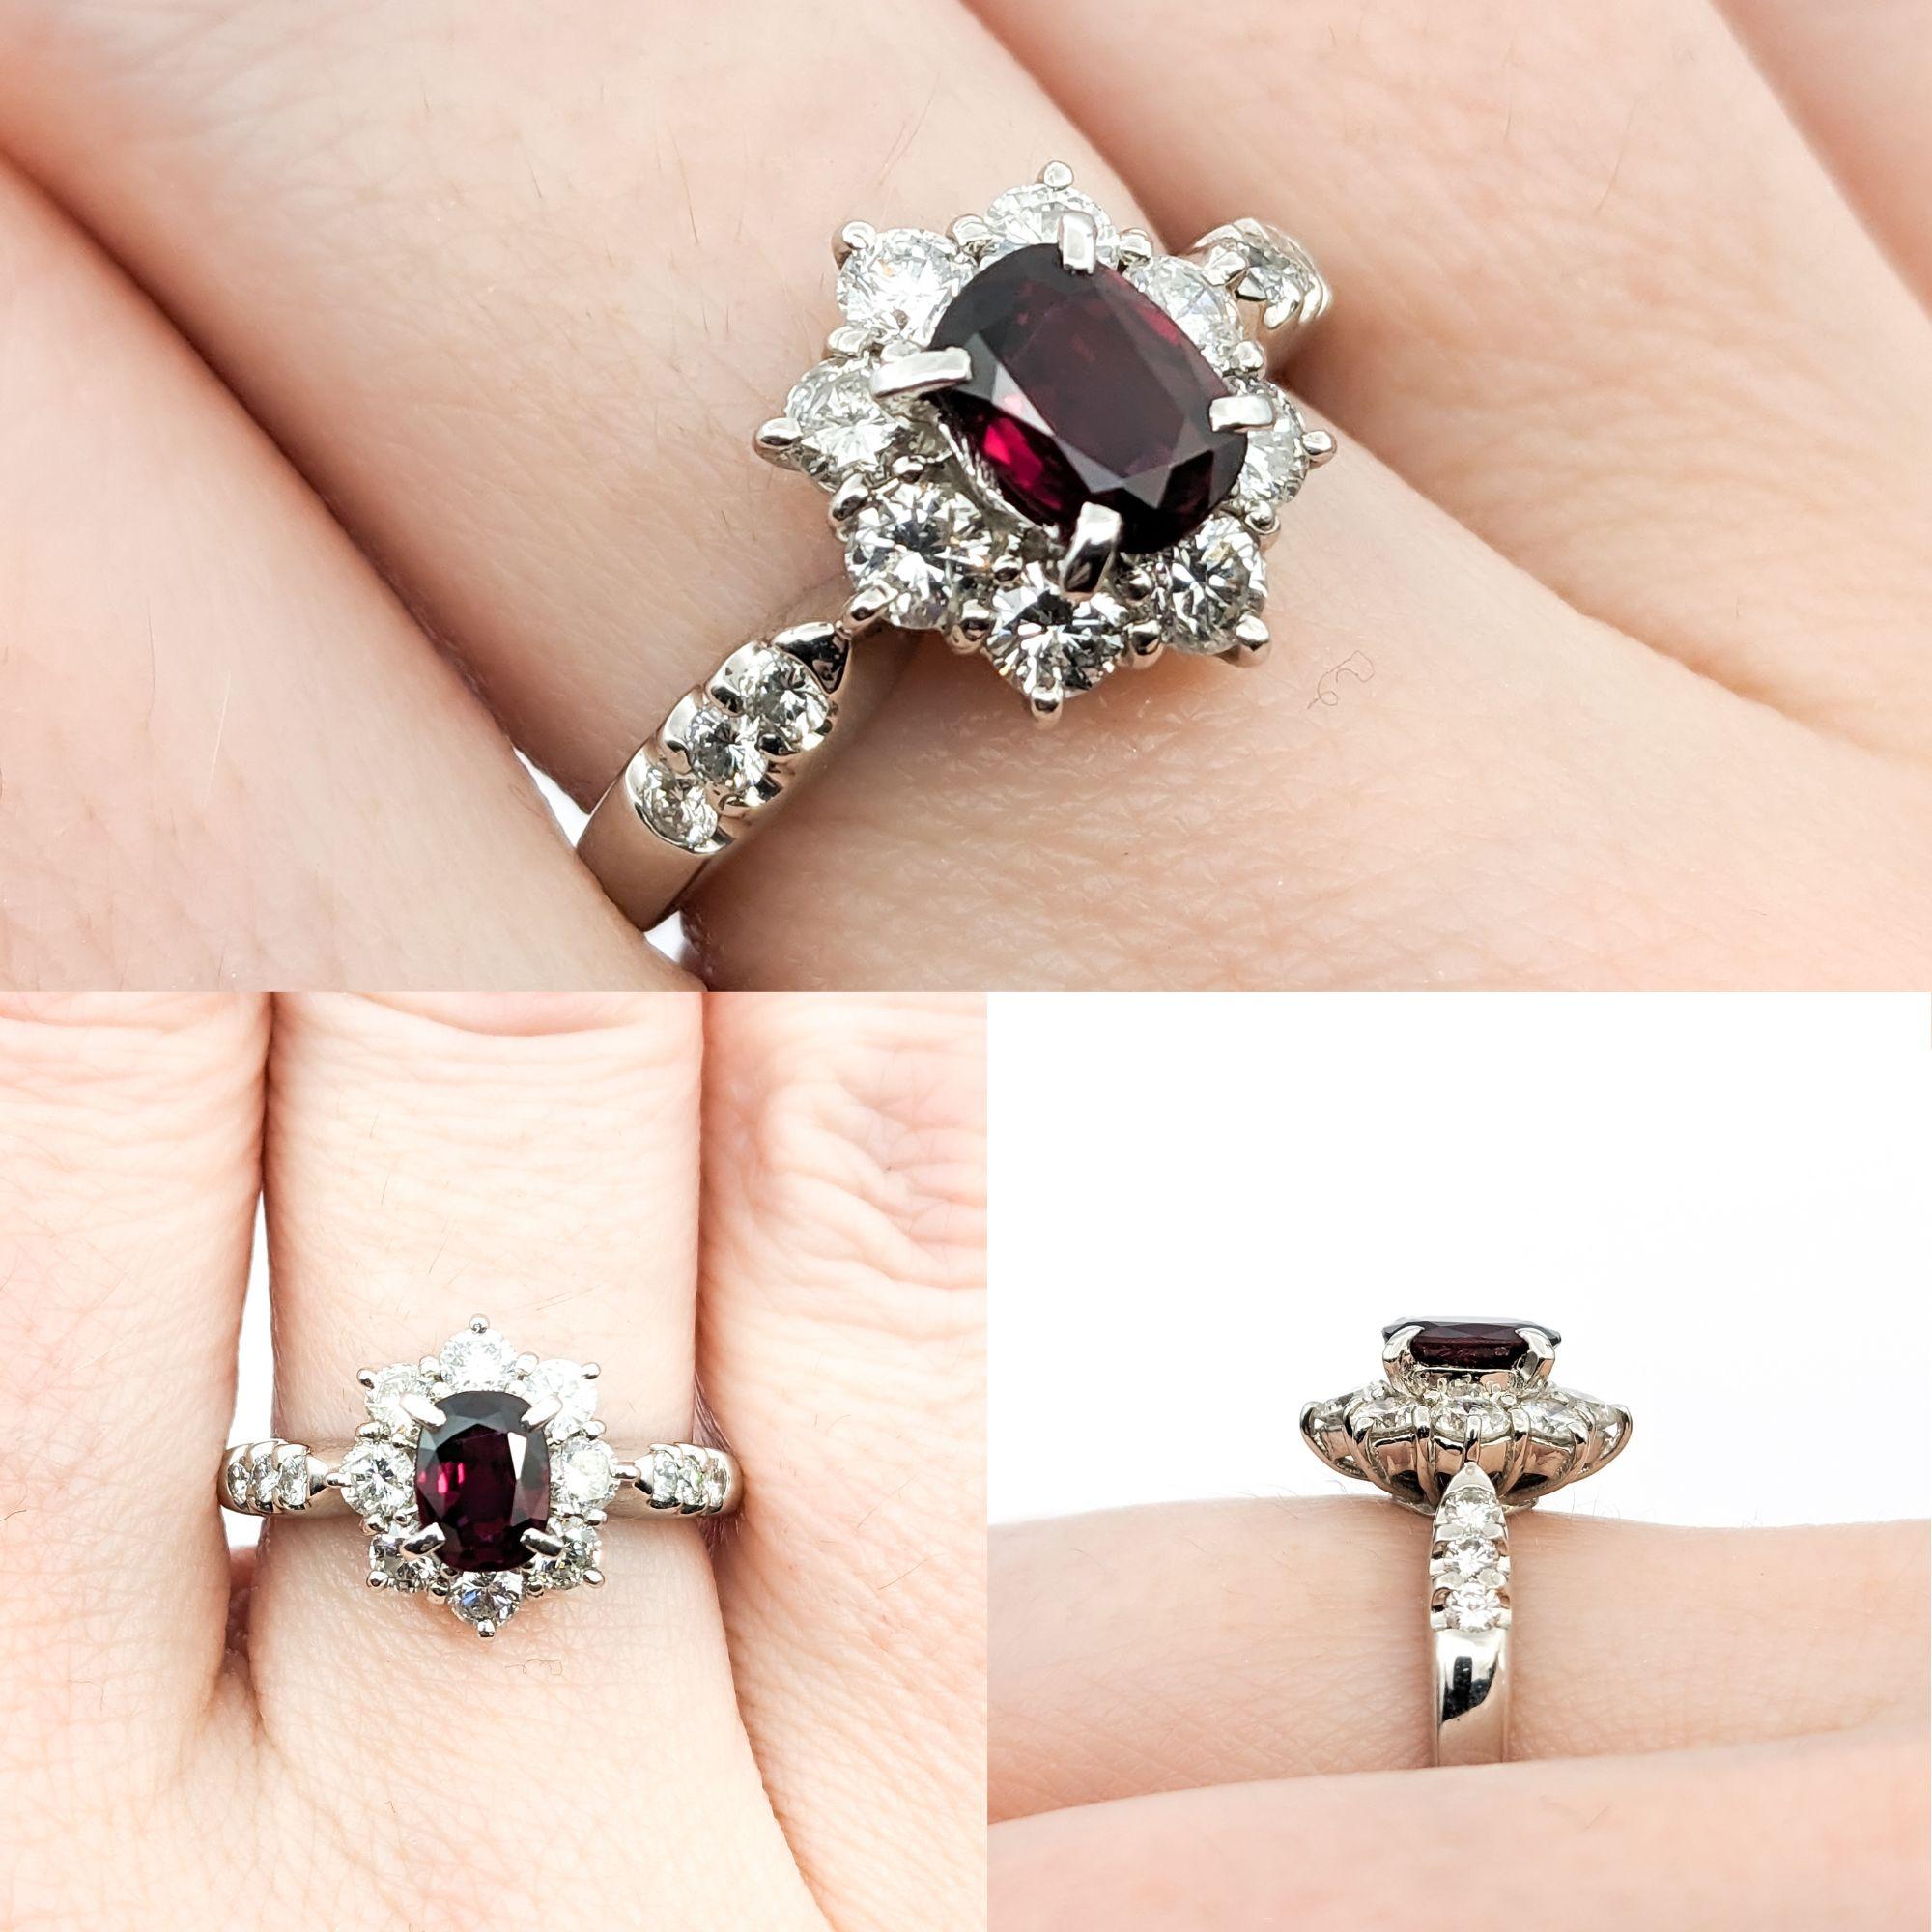 GIA .70ct Ruby & .82ctw Diamond Ring In Platinum

This ring, exquisitely crafted in 900 platinum, showcases a captivating 0.70ct ruby at its heart, encircled by 0.82ctw of round diamonds with SI clarity and a near colorless white hue. The